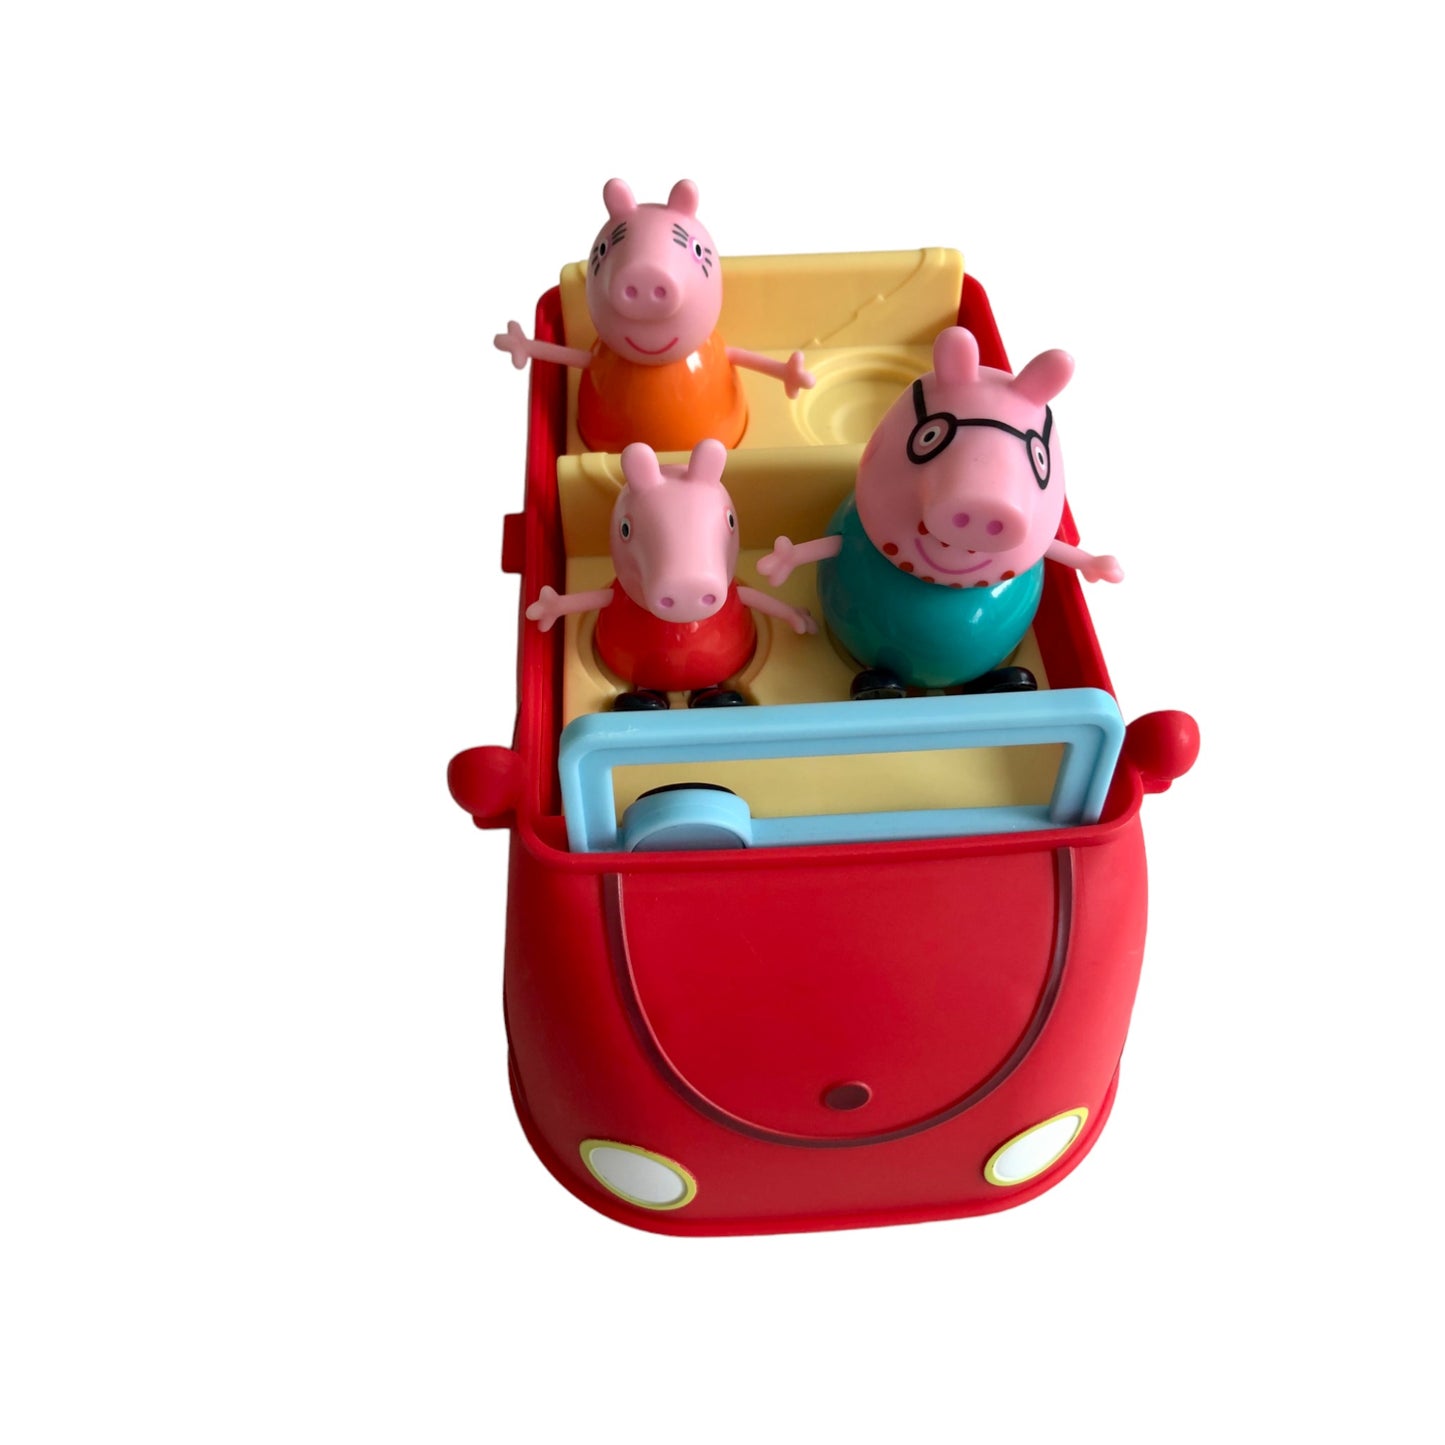 Peppa Pig - The red family car (3 characters included)